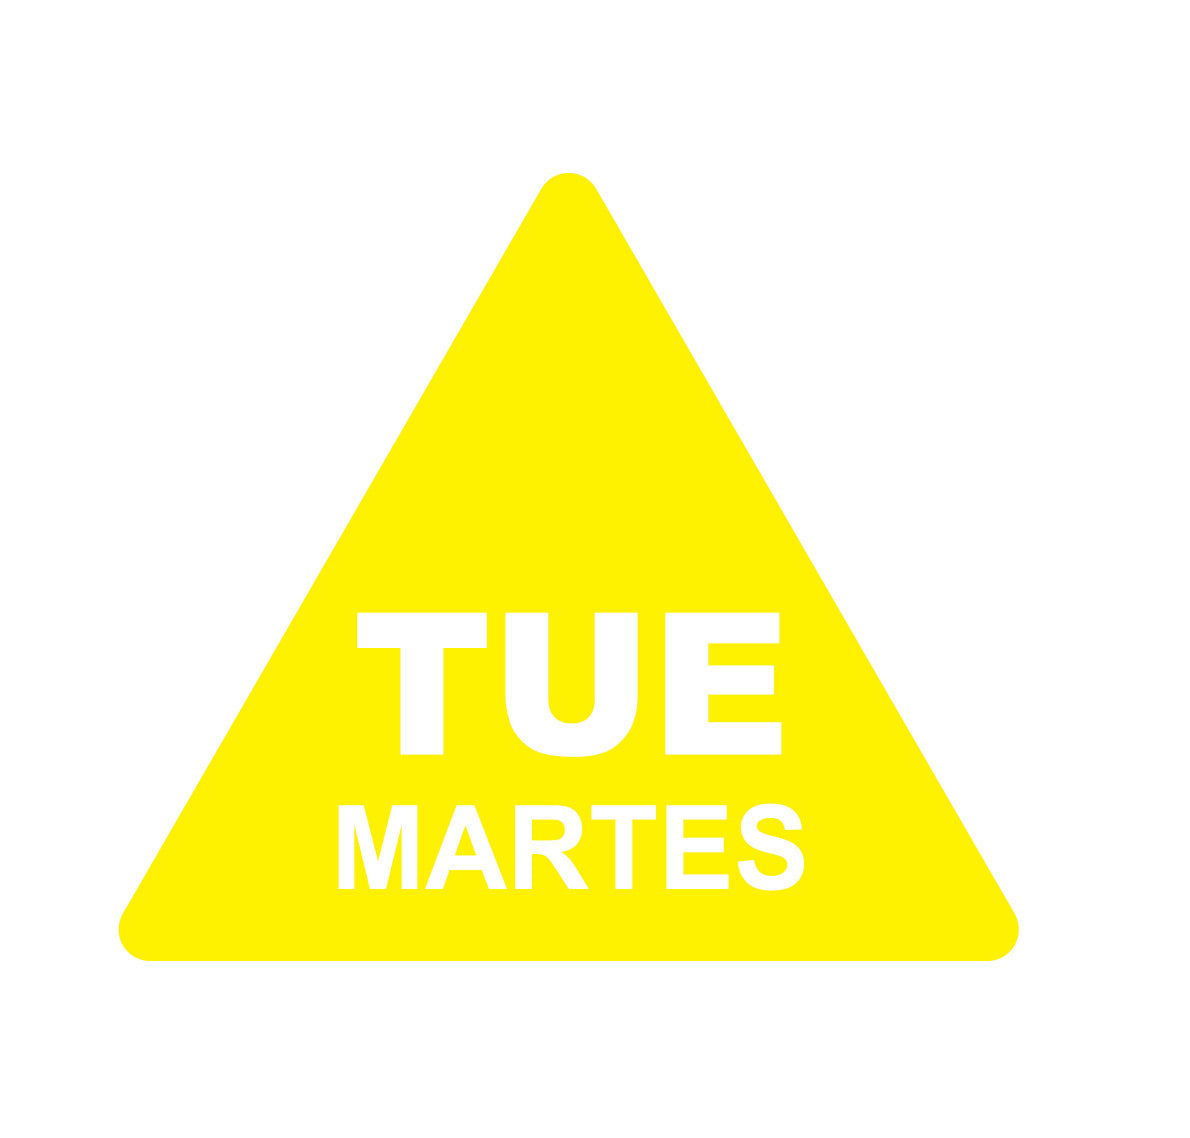 Woman Hand Writing Martes (Tuesday In Spanish) On Blank